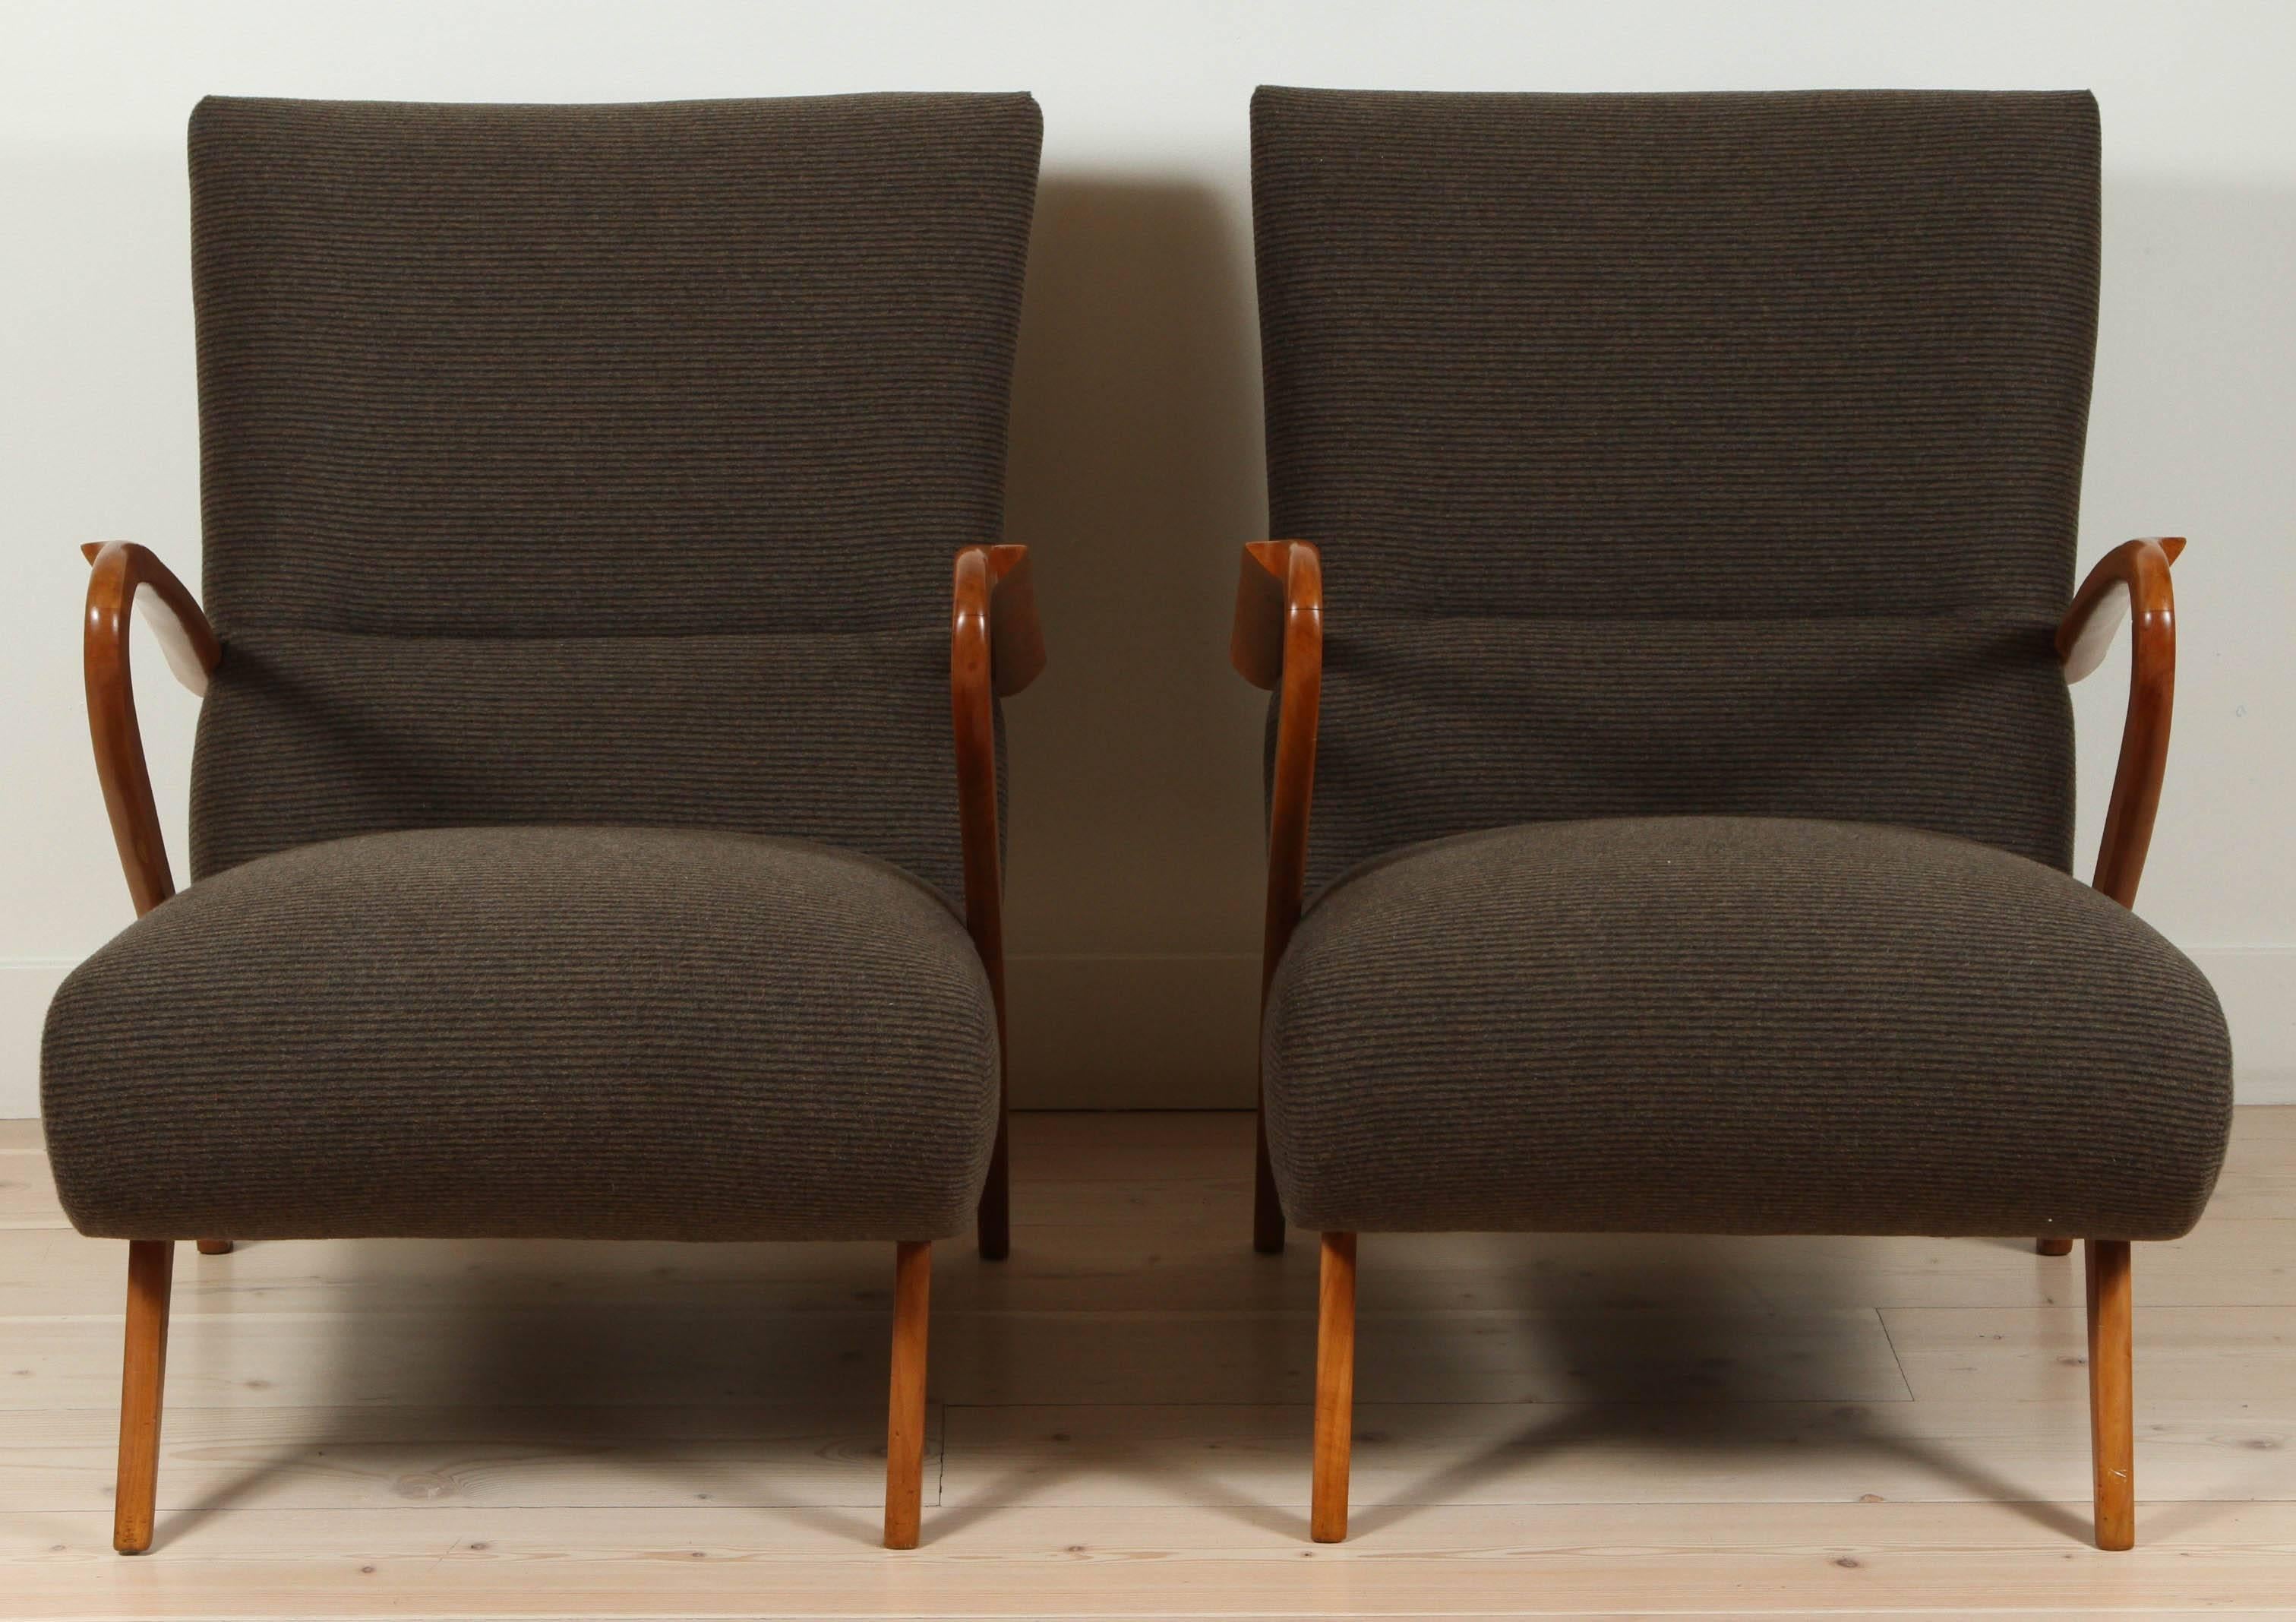 Pair of Cashmere Italian lounge chairs.